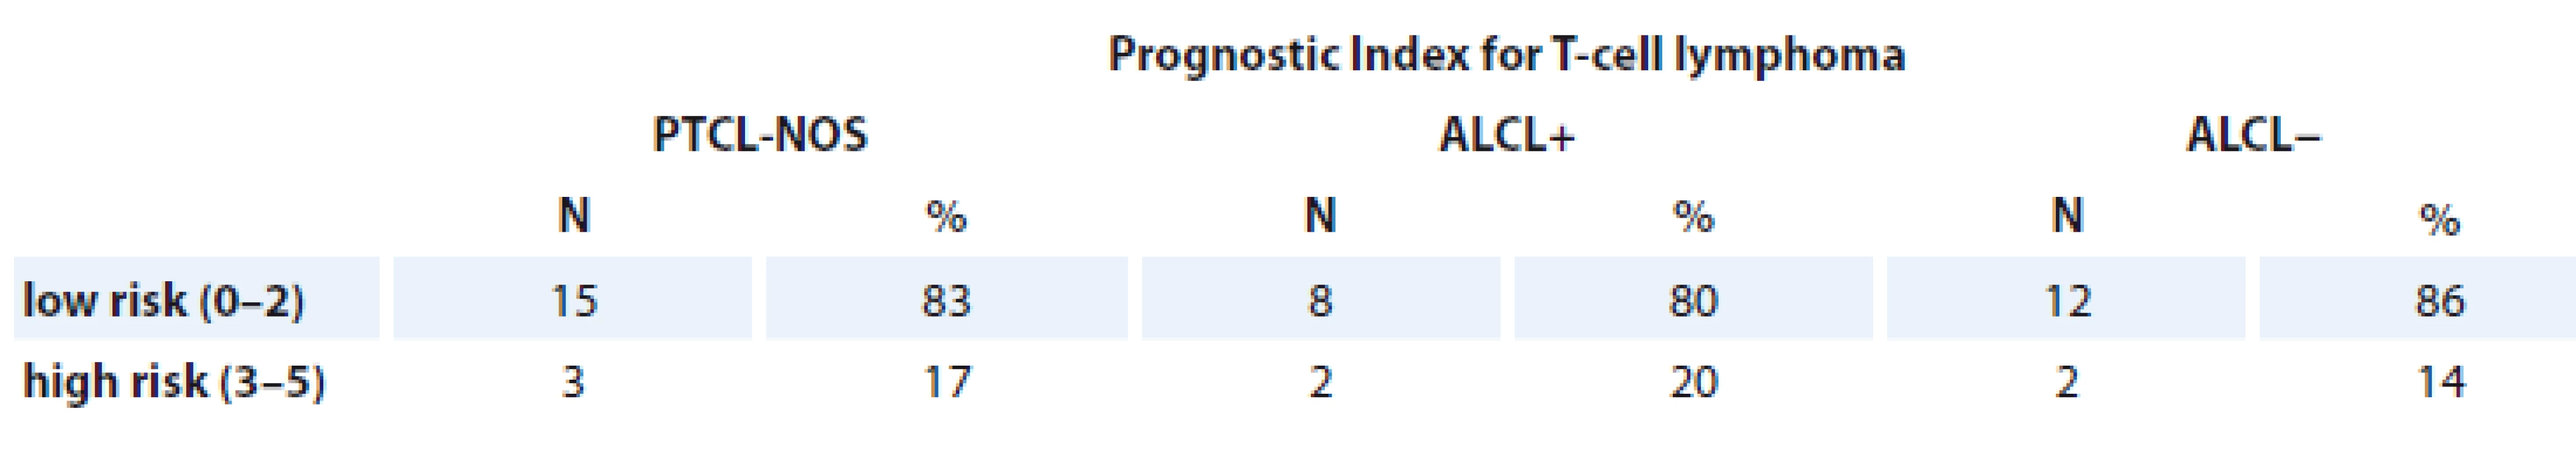 Patients assessed with Prognostic Index for T-cell lymphoma.